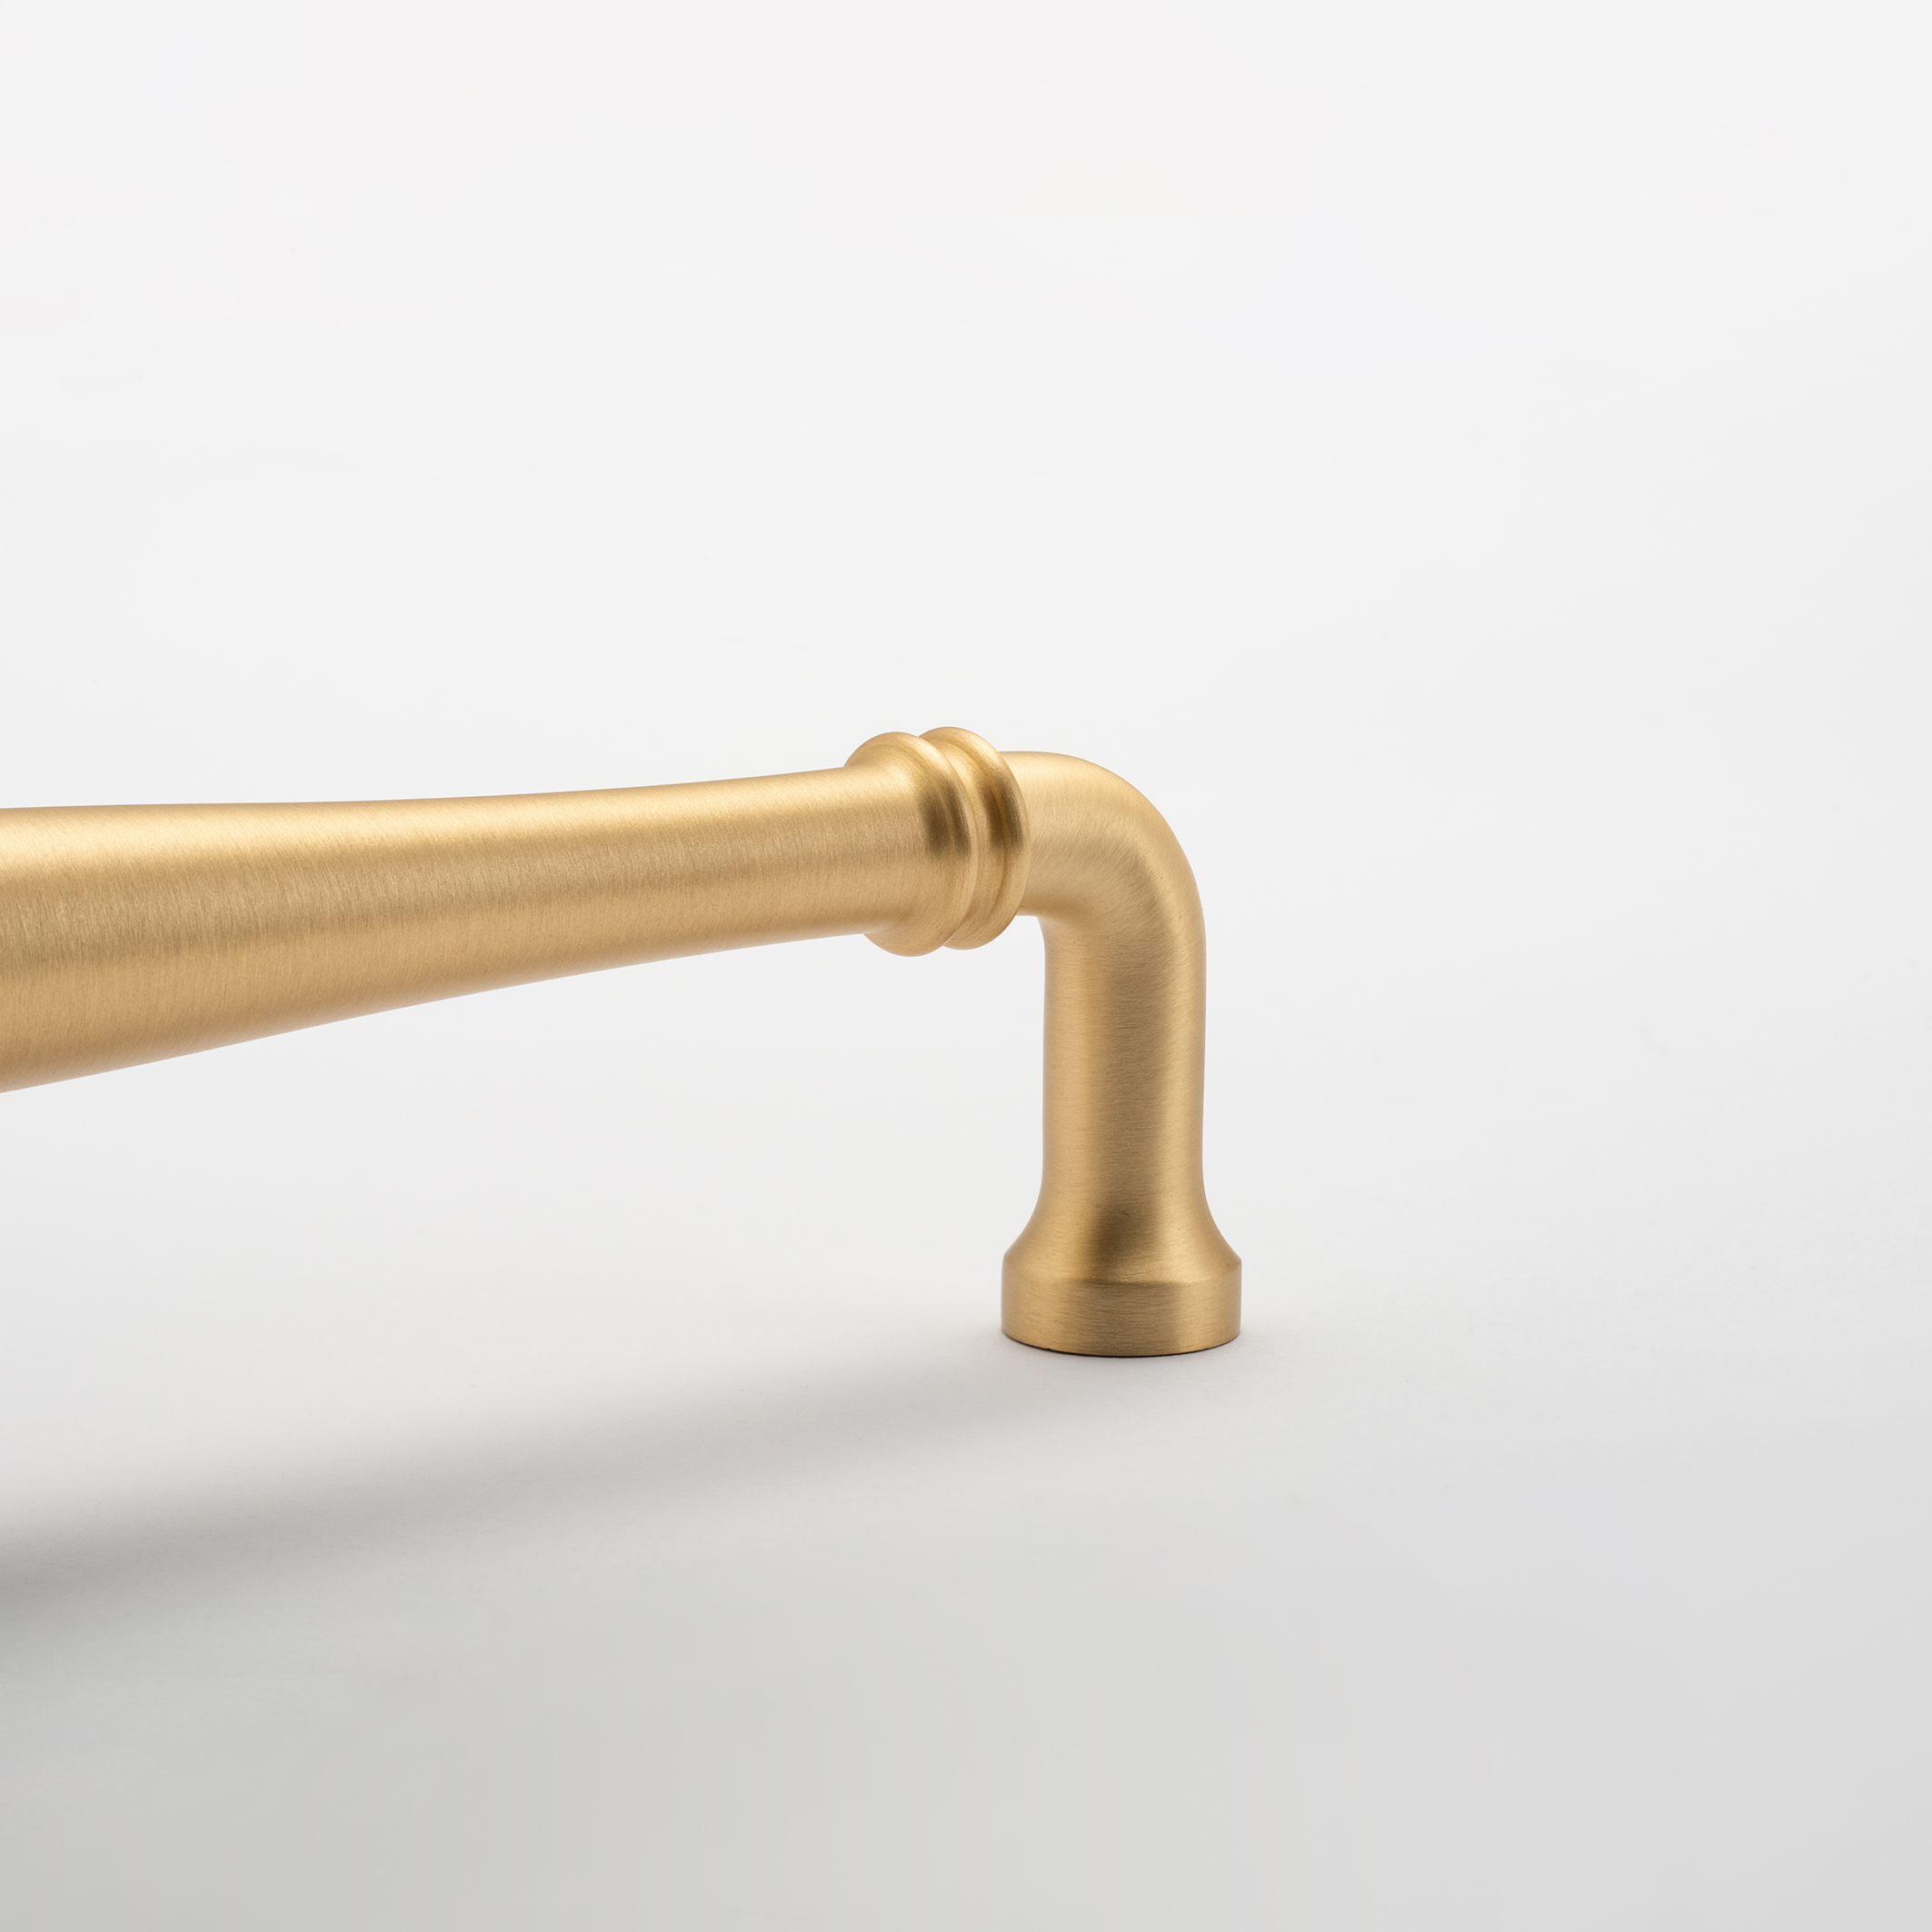 21106B - Sarlat Cabinet Pull with Backplate - CTC450mm - Brushed Brass